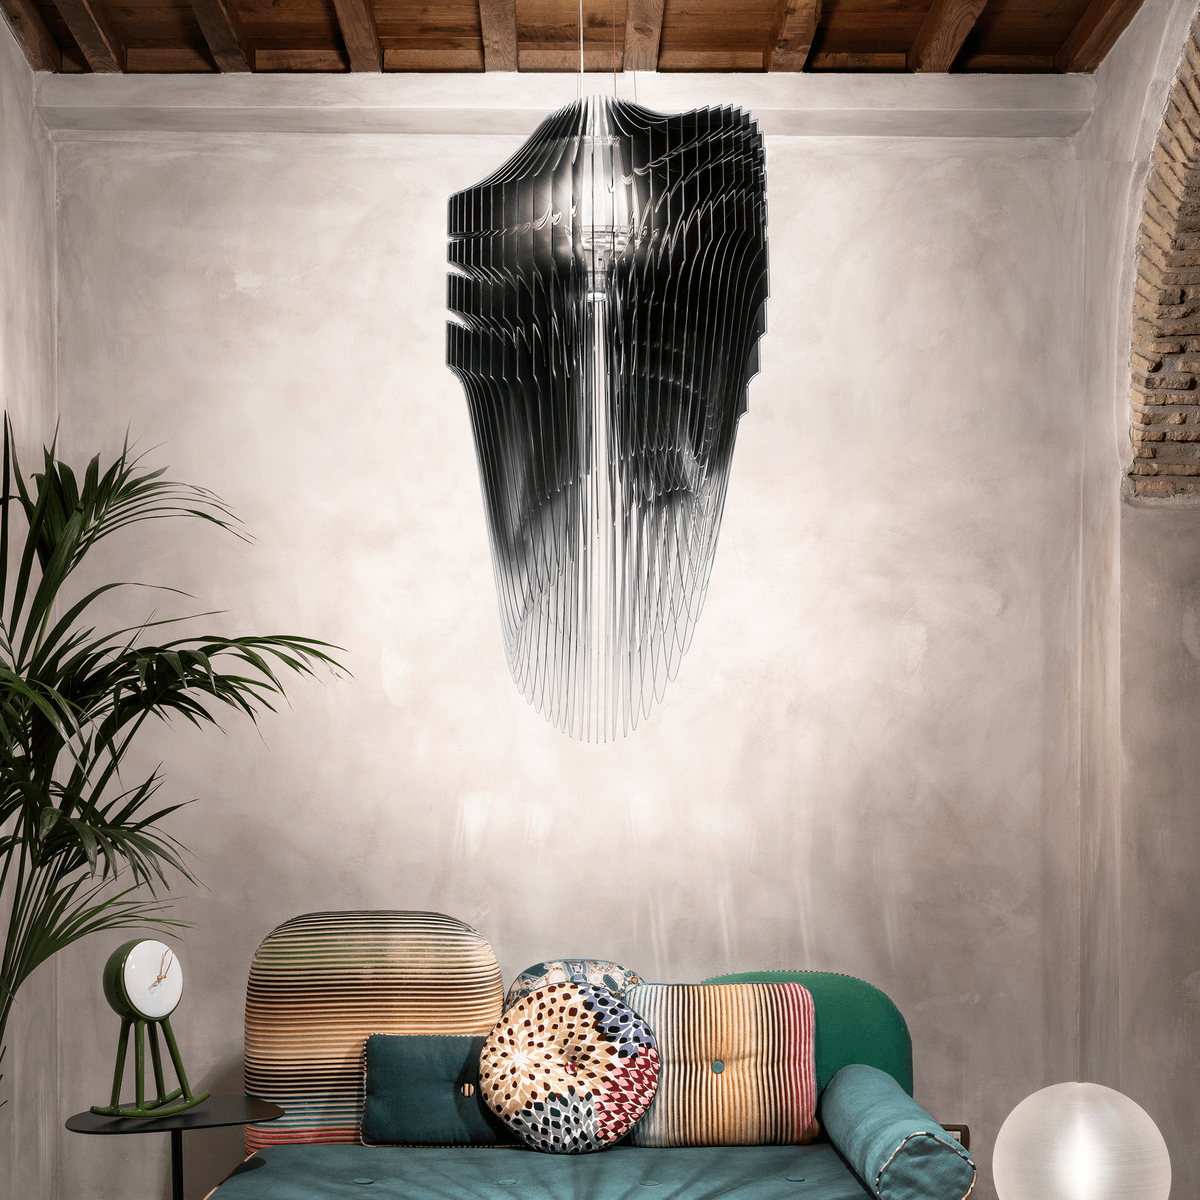 Oversized black, grey, and white pendant above green couch with colorful throw pillows